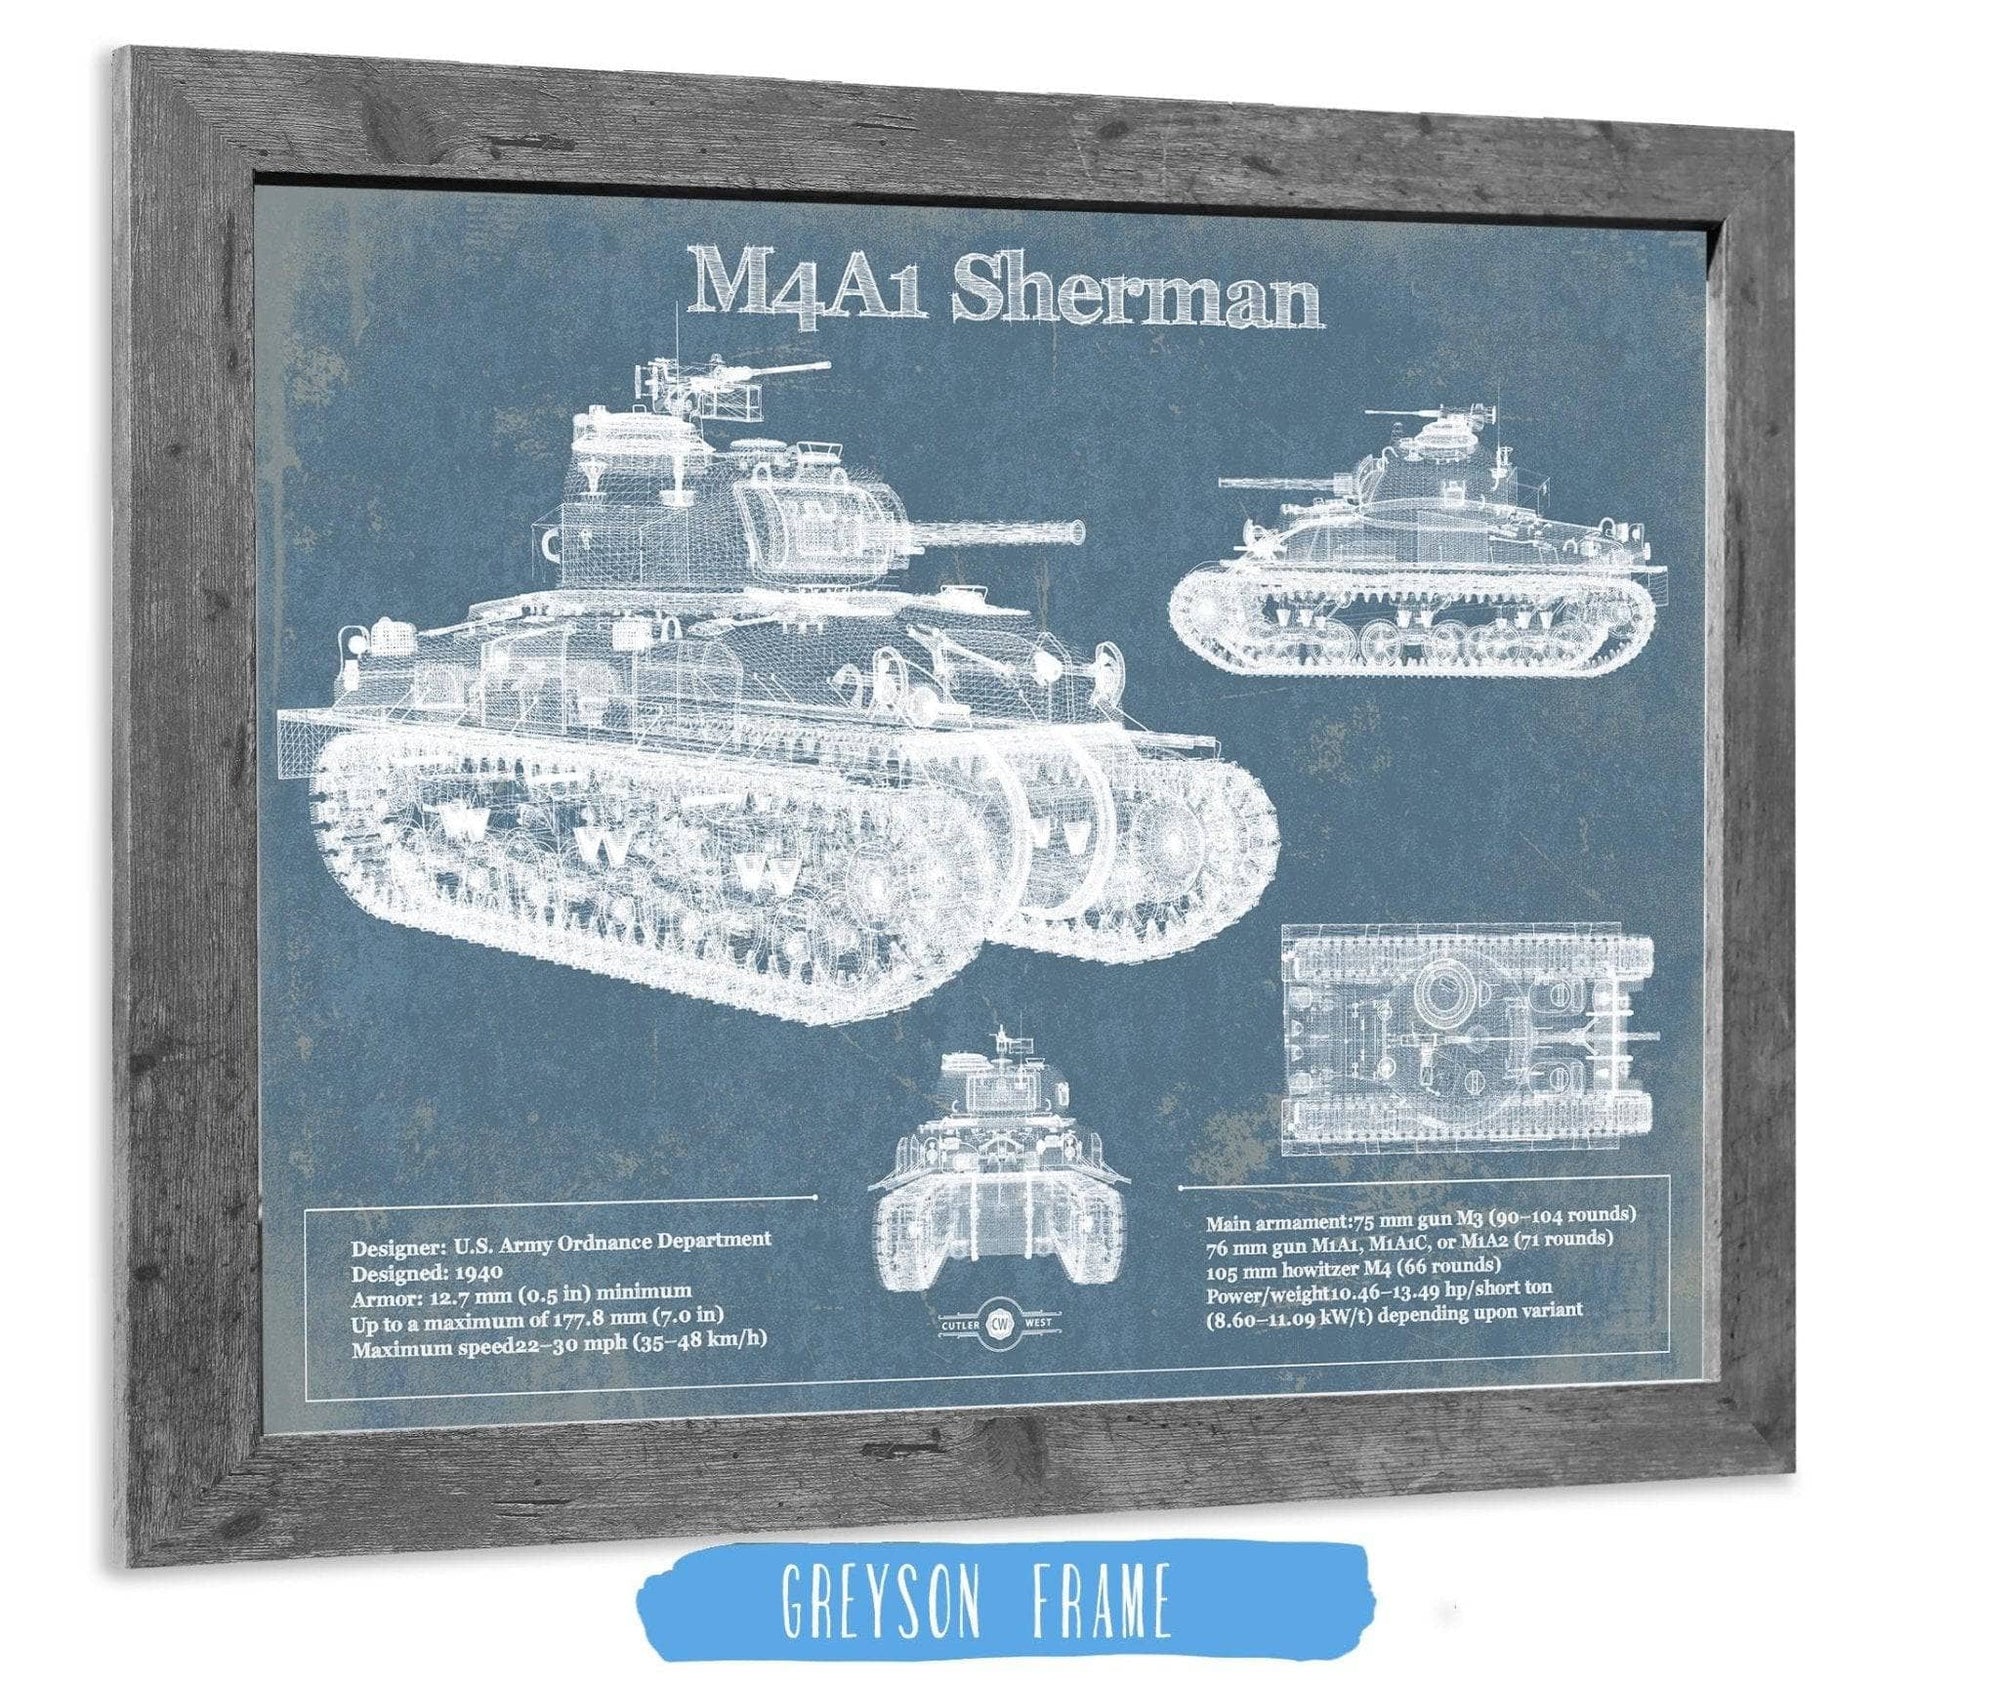 Cutler West Military Weapons Collection 14" x 11" / Greyson Frame M4A1 Sherman Tank Vintage Blueprint Print 845000241_15771